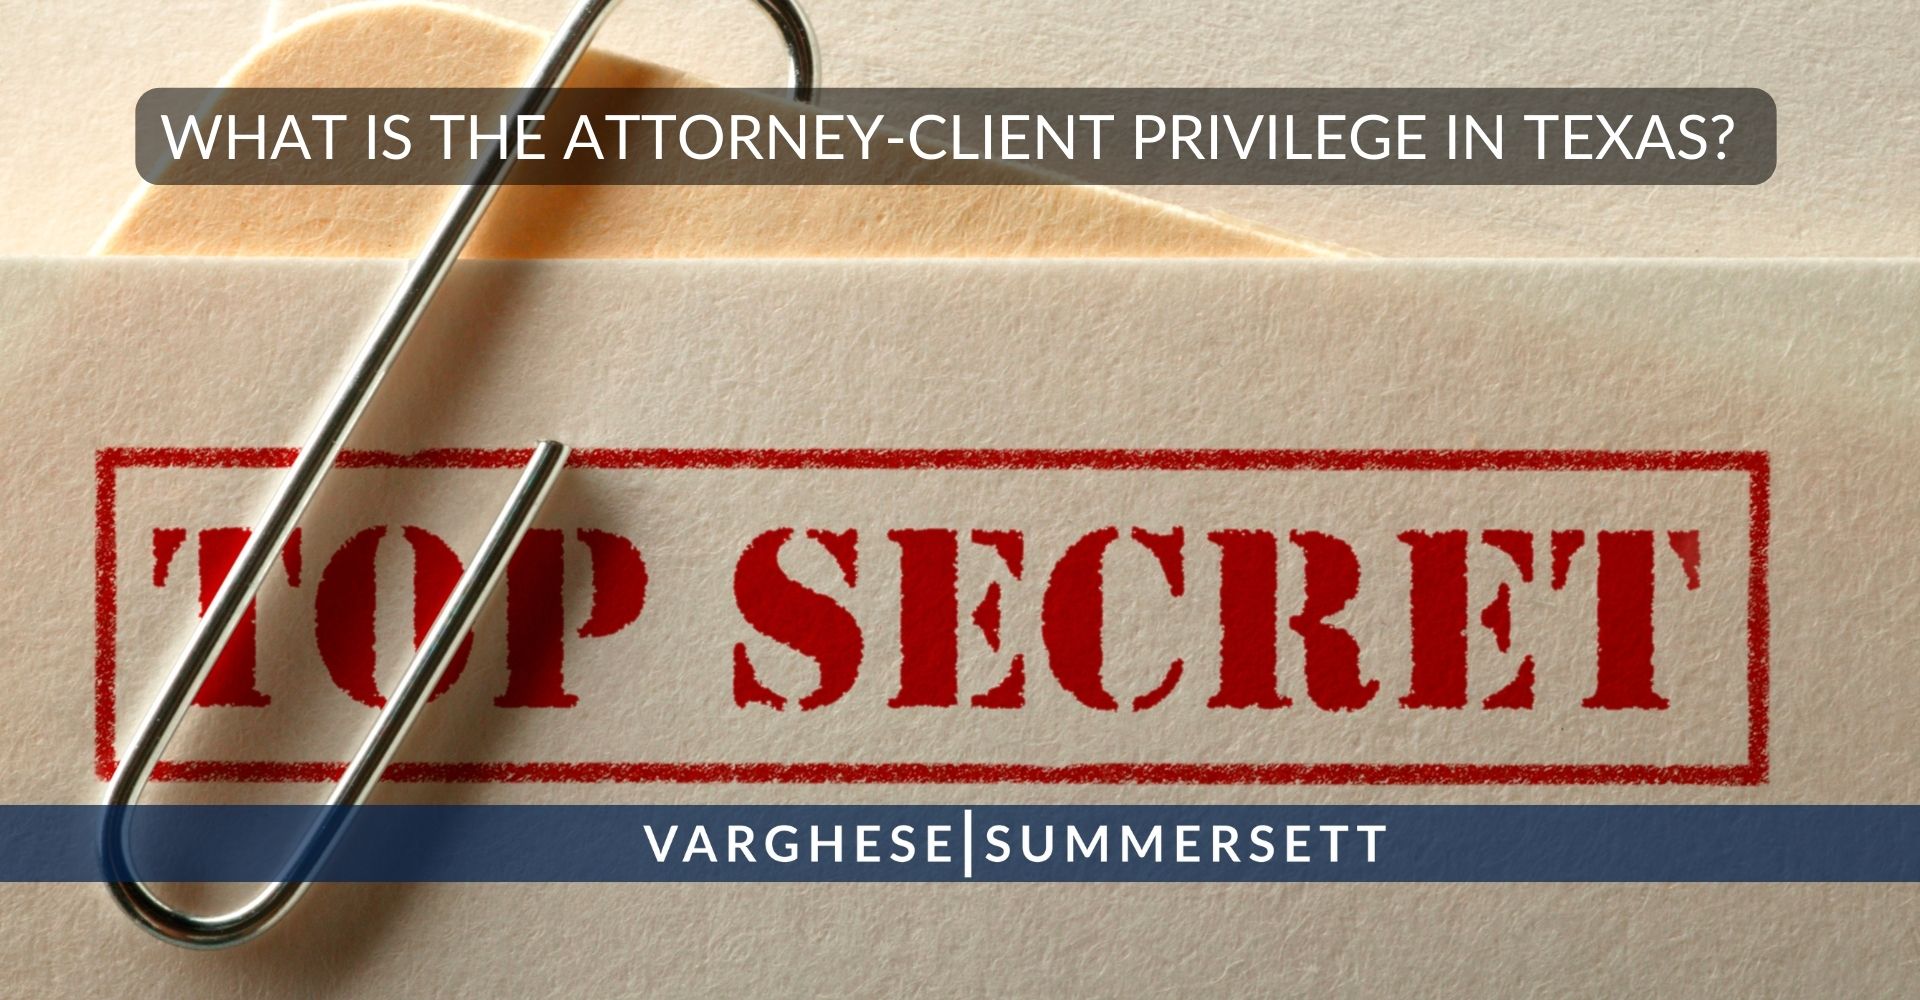 What is the Attorney-Client Privilege in Texas?